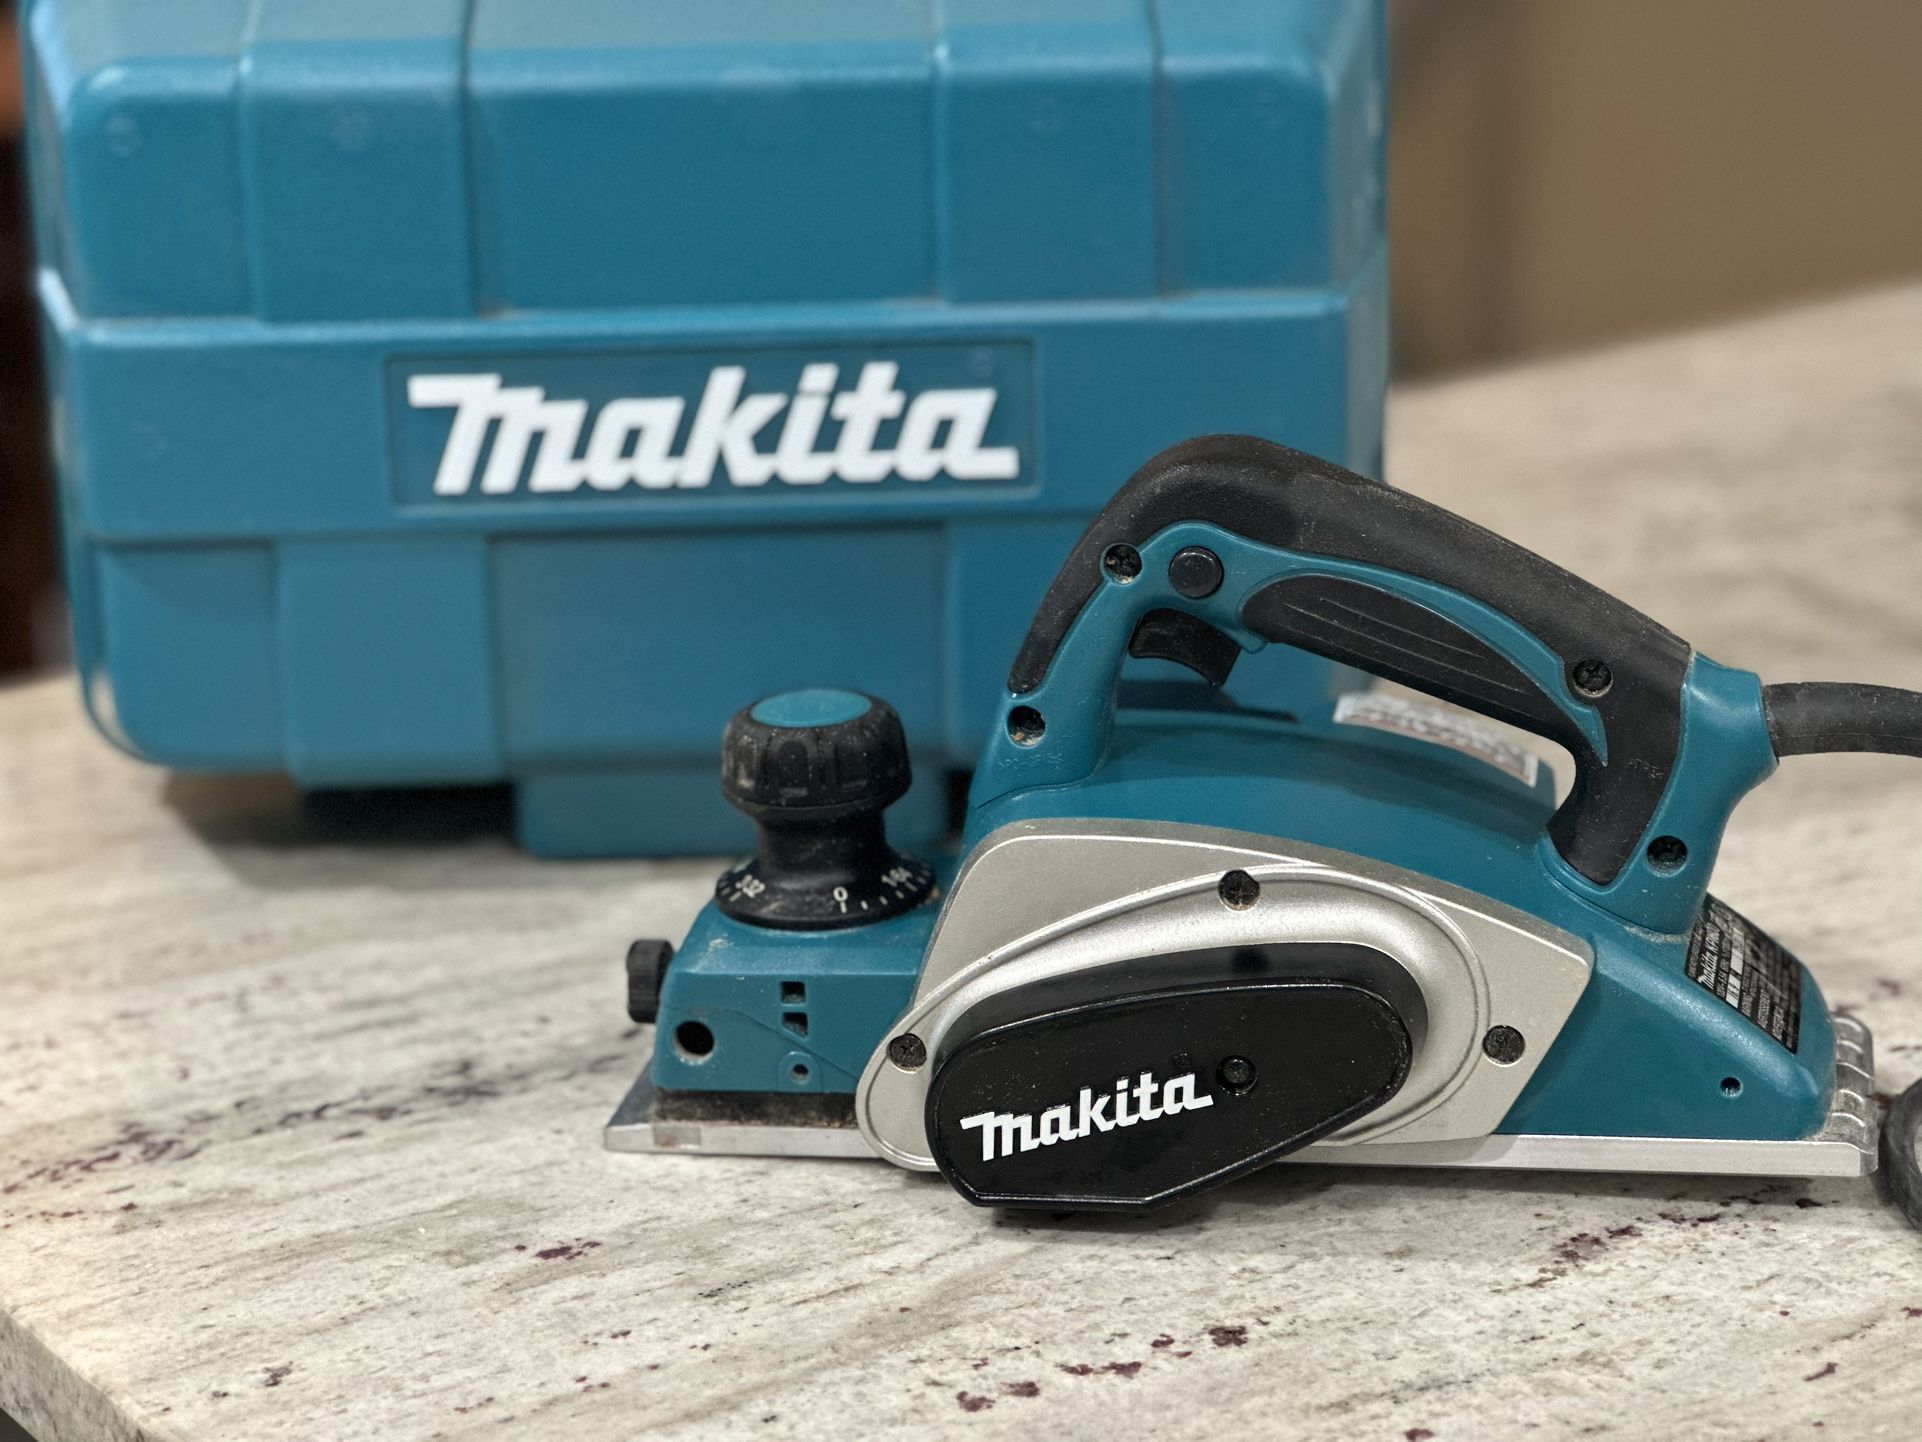 Makita 3-1/4" Planer with Case